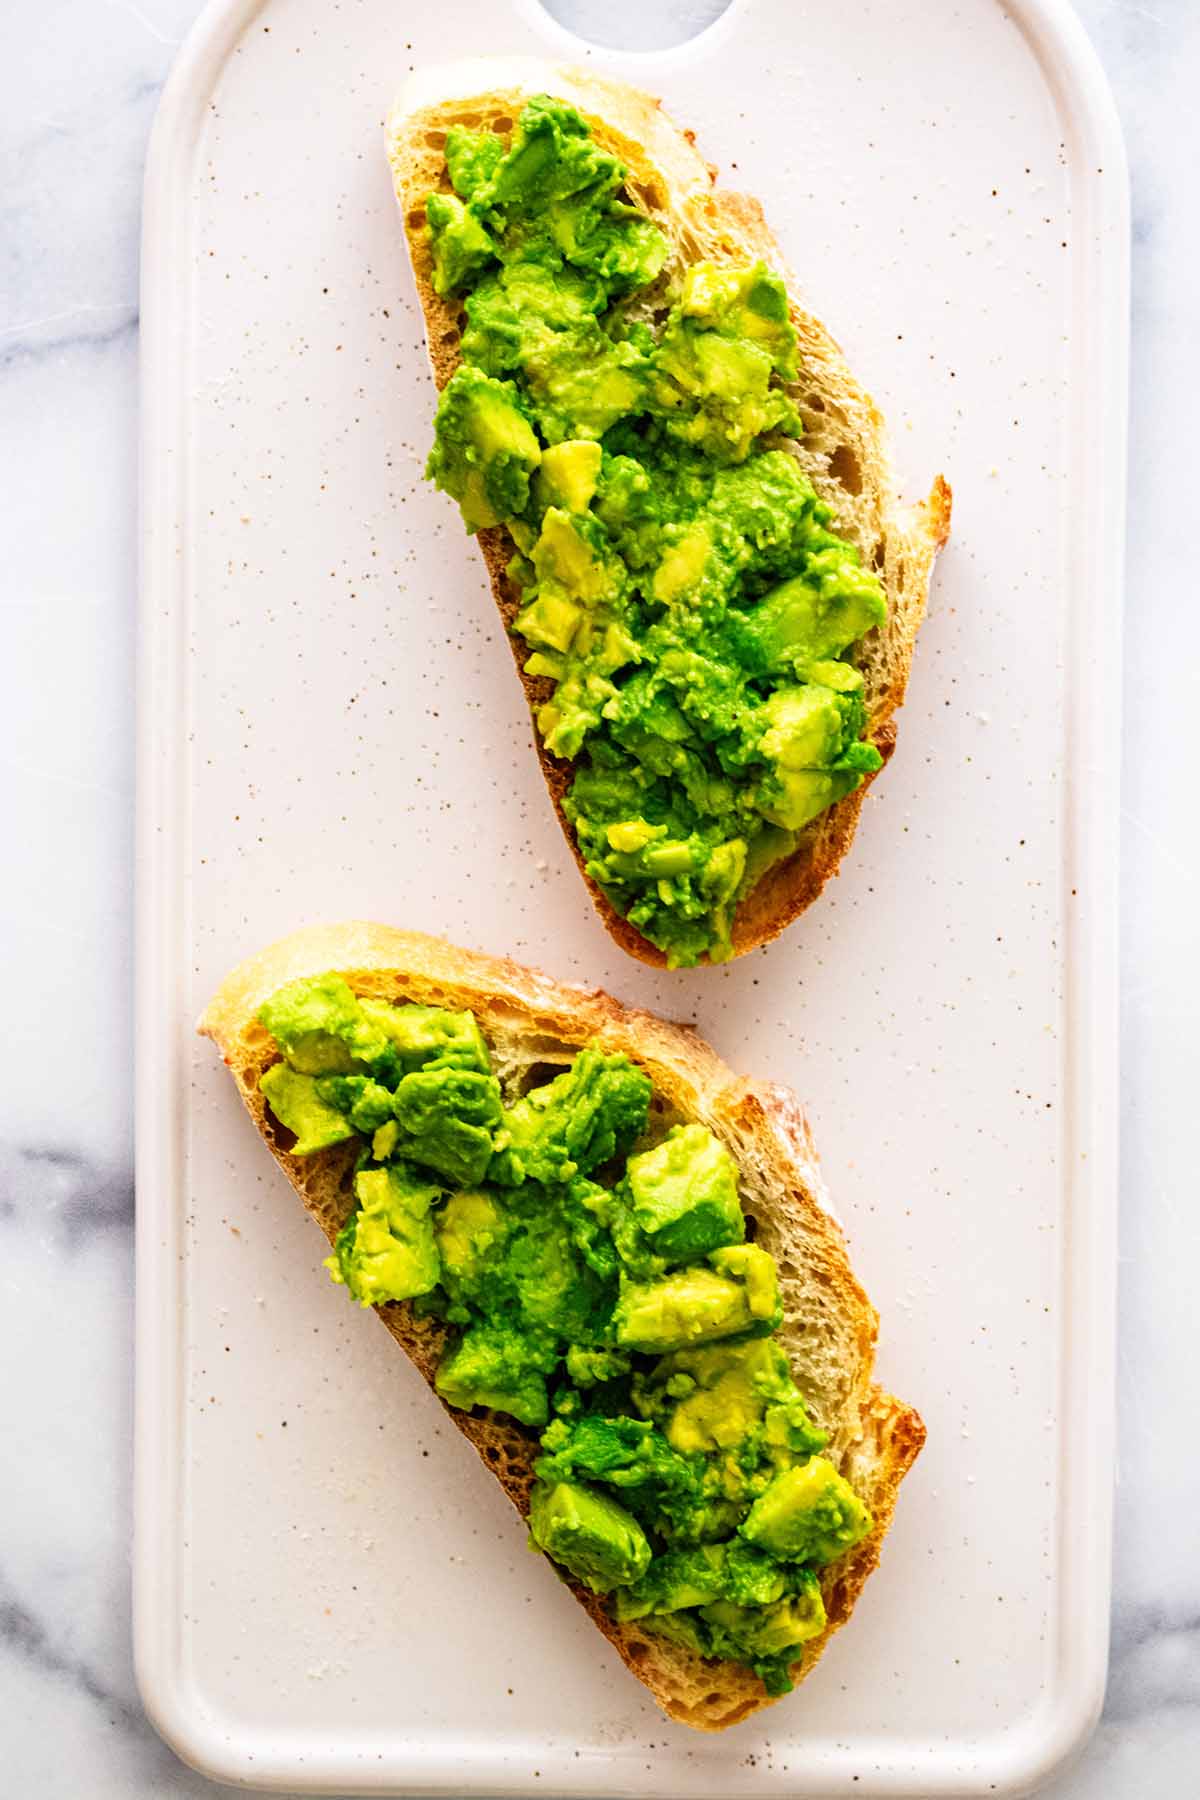 Mashed avocado mixture on two slices of toast.